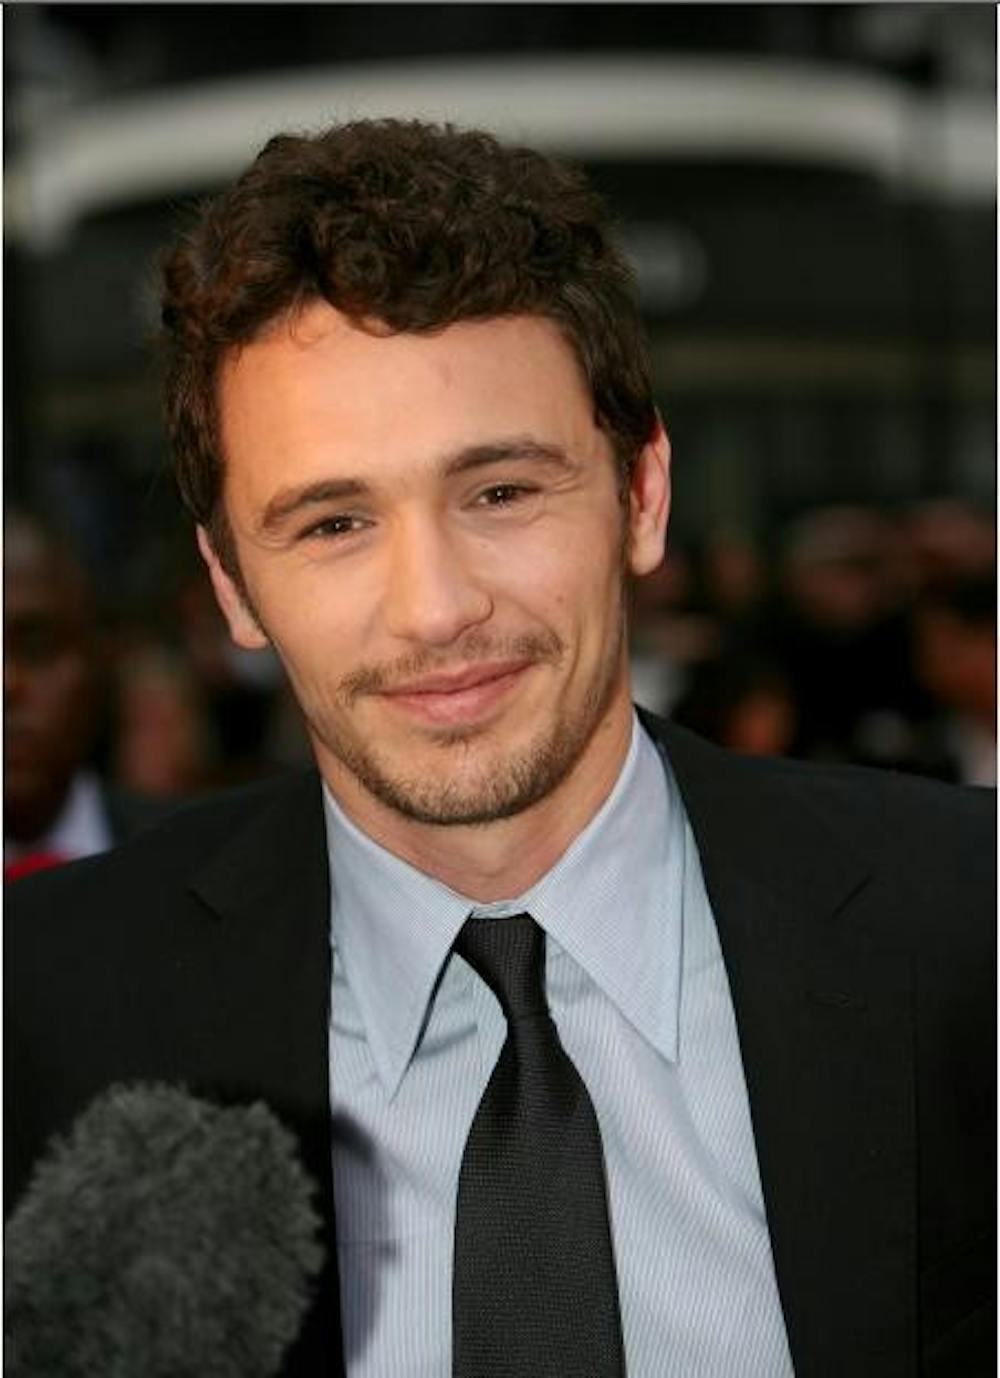 <p>James Franco, Golden Globe-winning actor and filmmaker will conclude the series on April 29 as the undergraduate student choice speaker.</p>